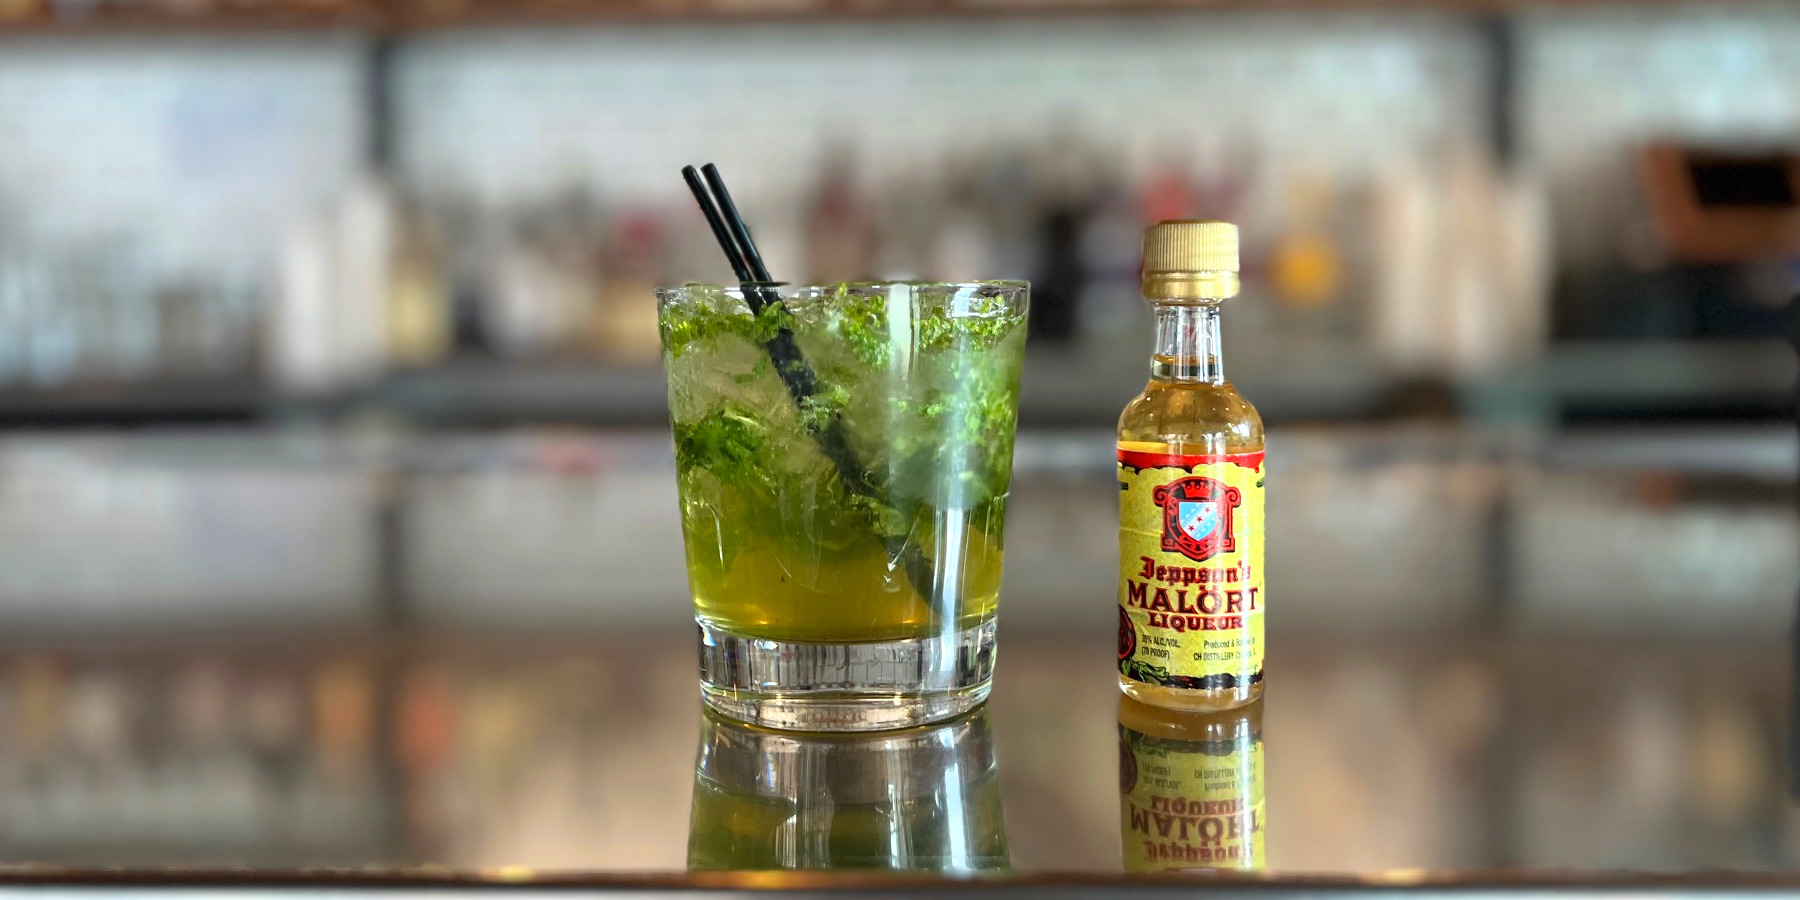 For Malört Fest 2023, there are five Champaign bars competing in a Malört cocktail competition. Pictured is Pour Bros Taproom's entry for the Malört Fest cocktail competition with fresh herbs. Photo by Alyssa Buckley.